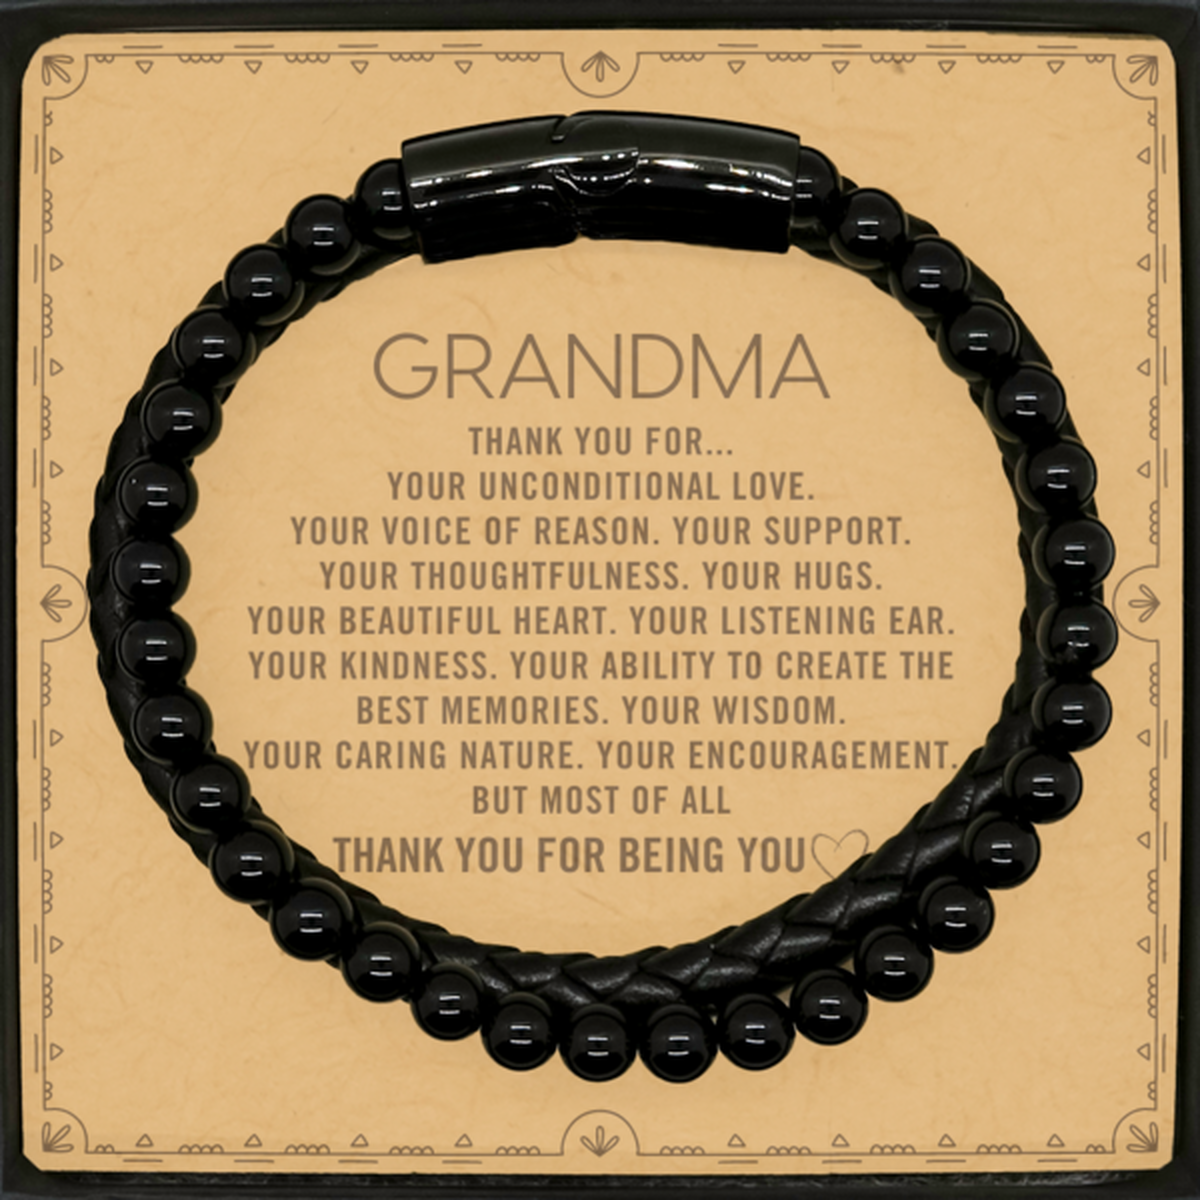 Grandma Stone Leather Bracelets Custom, Message Card Gifts For Grandma Christmas Graduation Birthday Gifts for Men Women Grandma Thank you for Your unconditional love